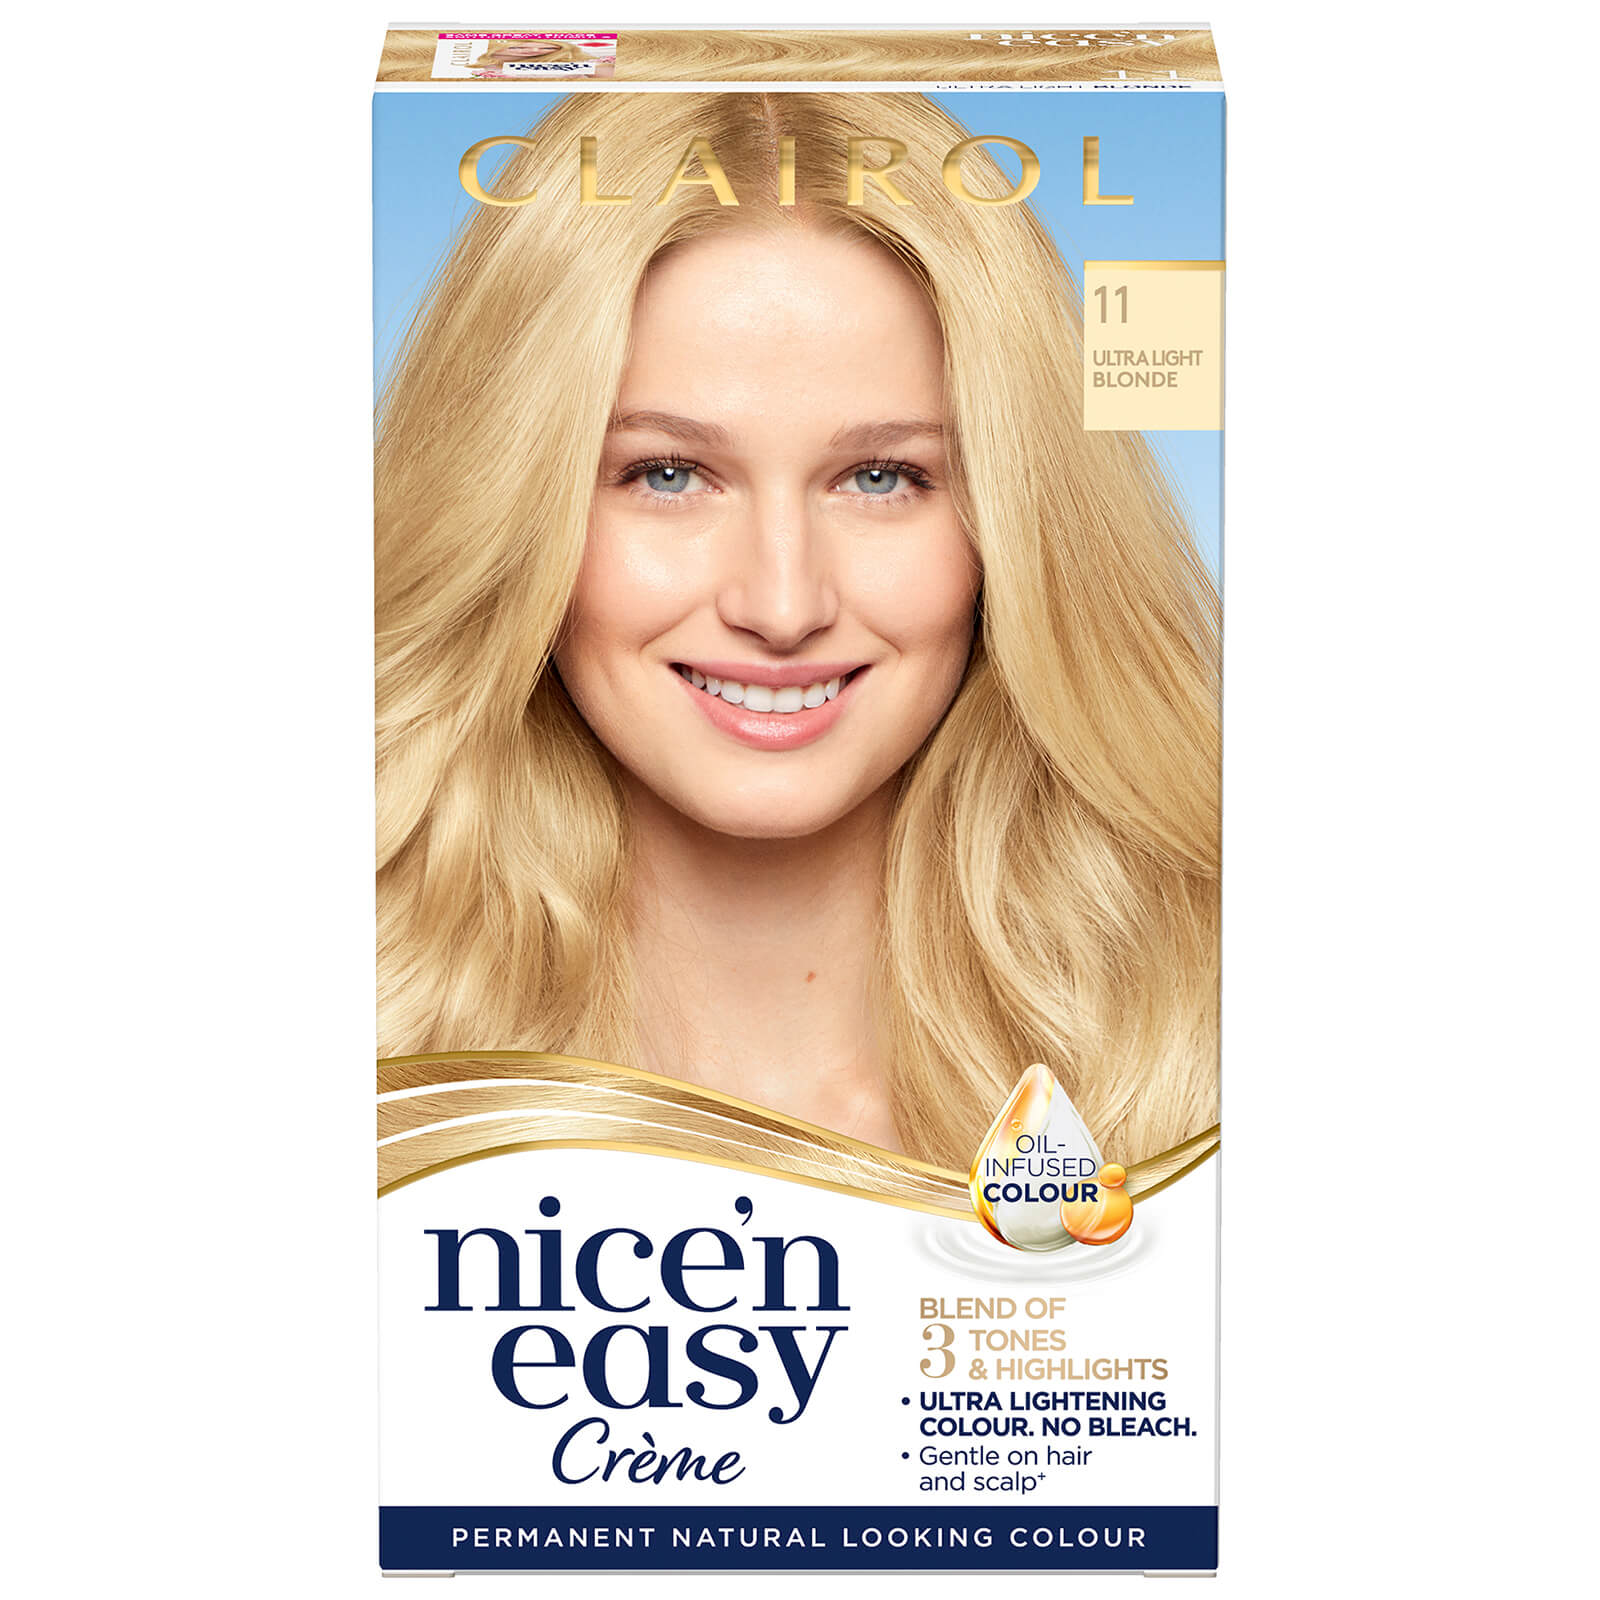 Clairol Nice' n Easy Crème Natural Looking Oil Infused Permanent Hair Dye 177ml (Various Shades) - 11 Ultra Light Blonde